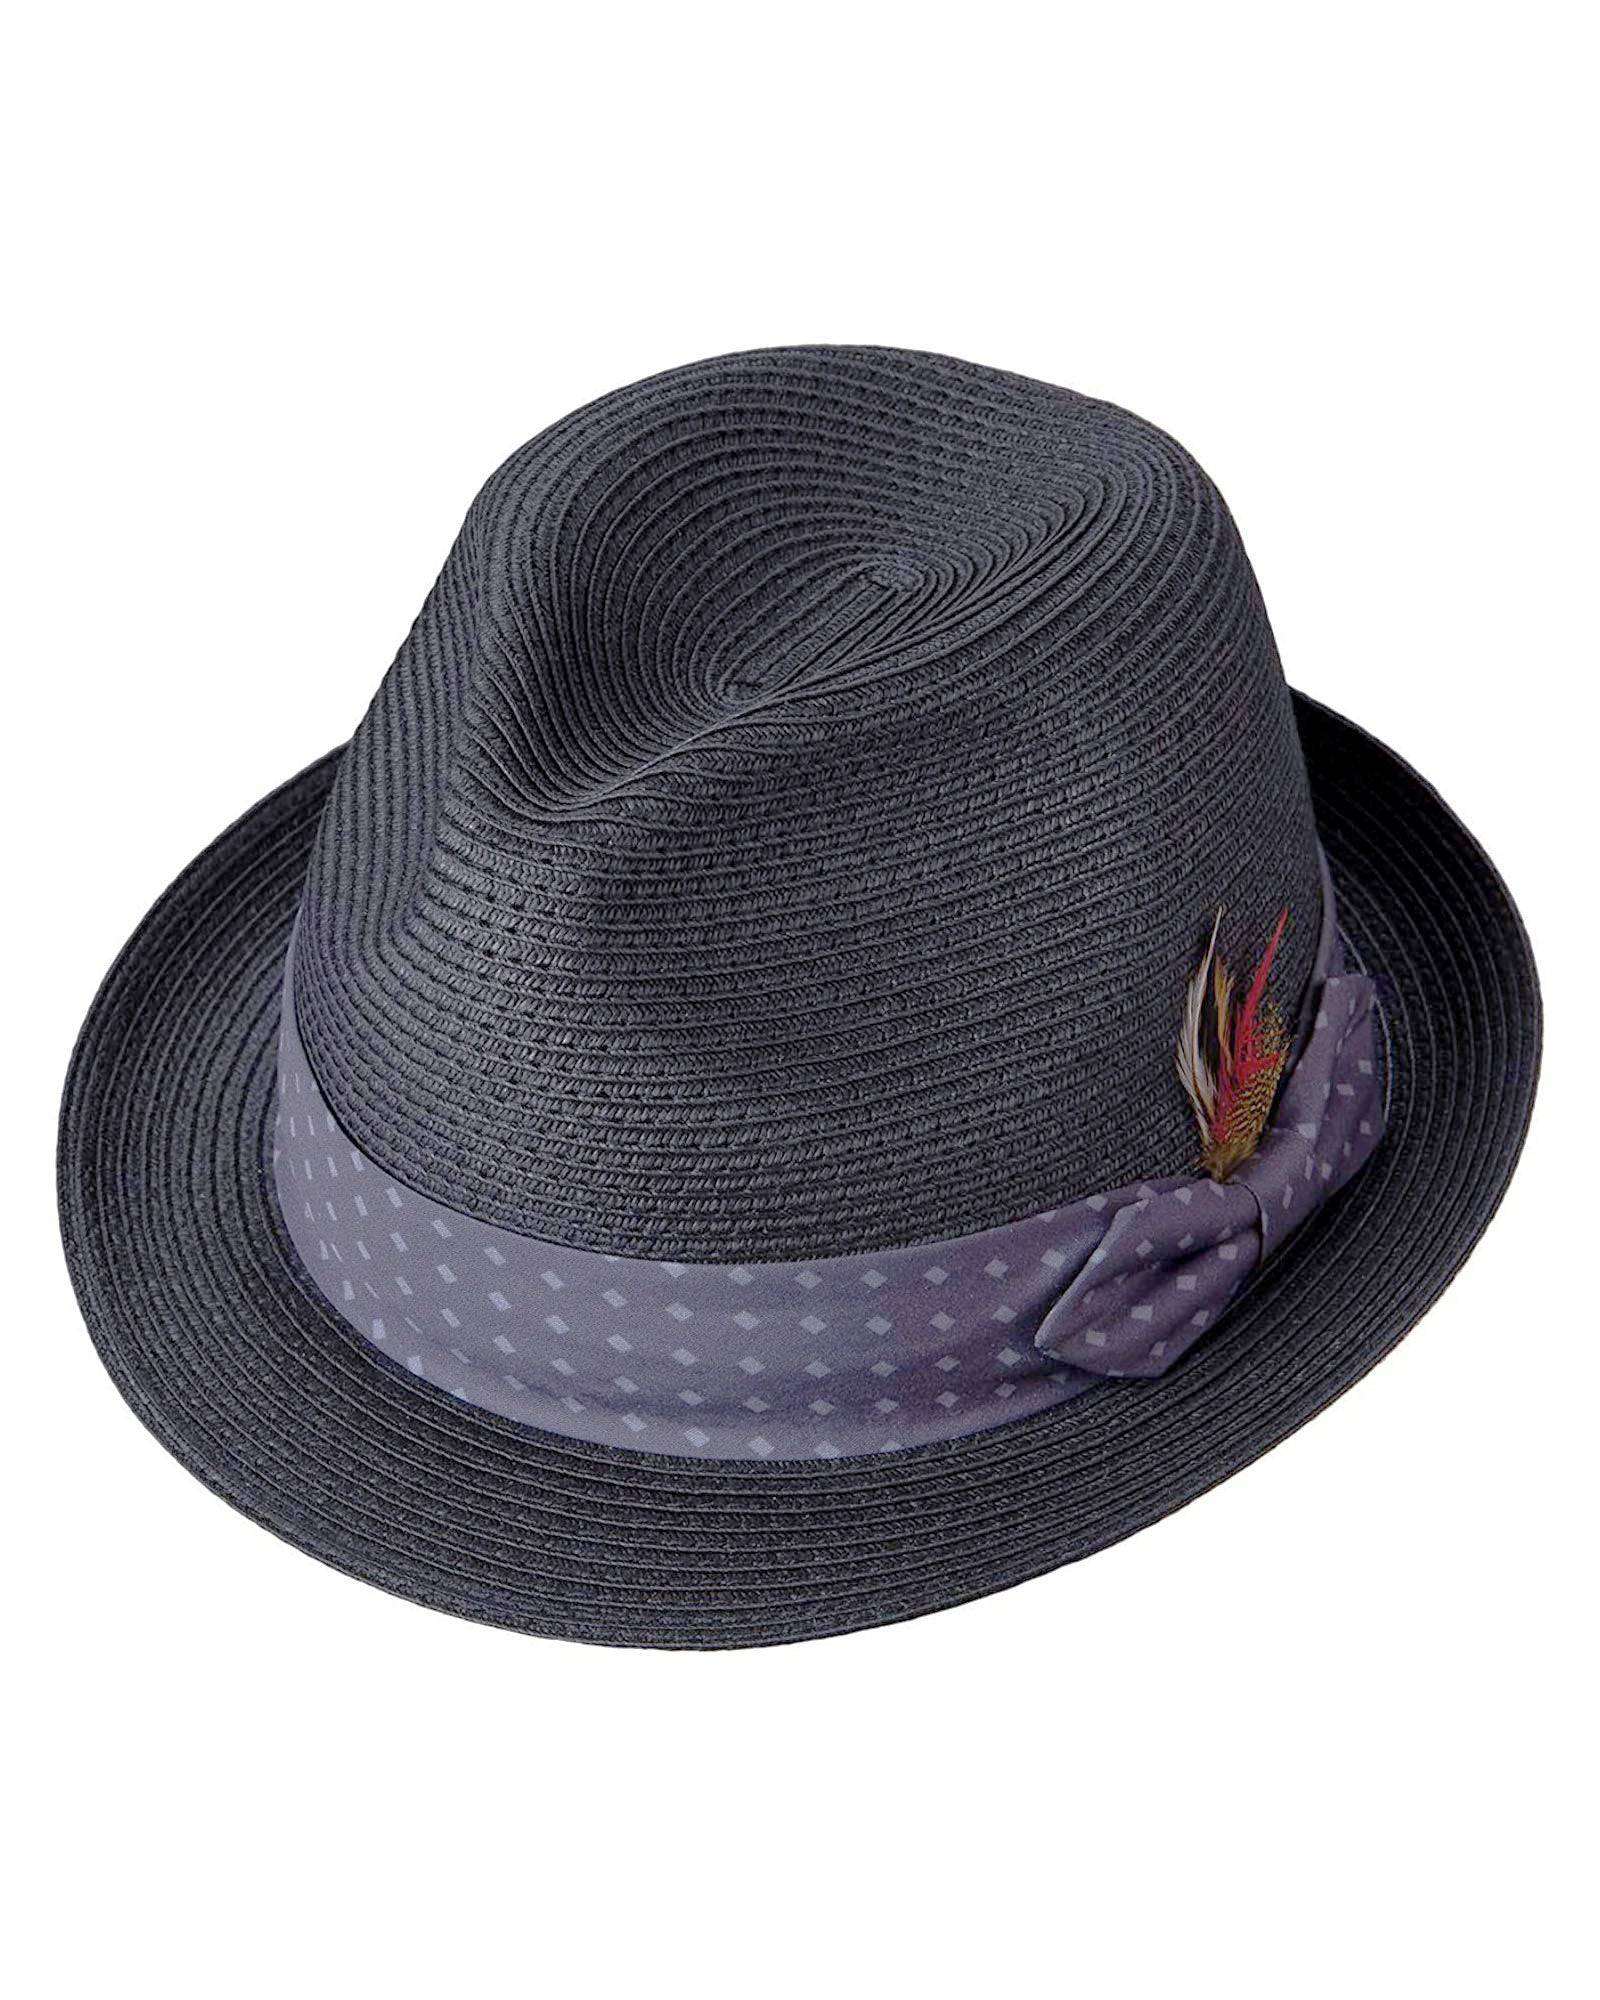 Broner Mens Connoisseur Pinch Front Straw Fedora with Contrast Color Dotted Band In Blue Grey - Rainwater's Men's Clothing and Tuxedo Rental